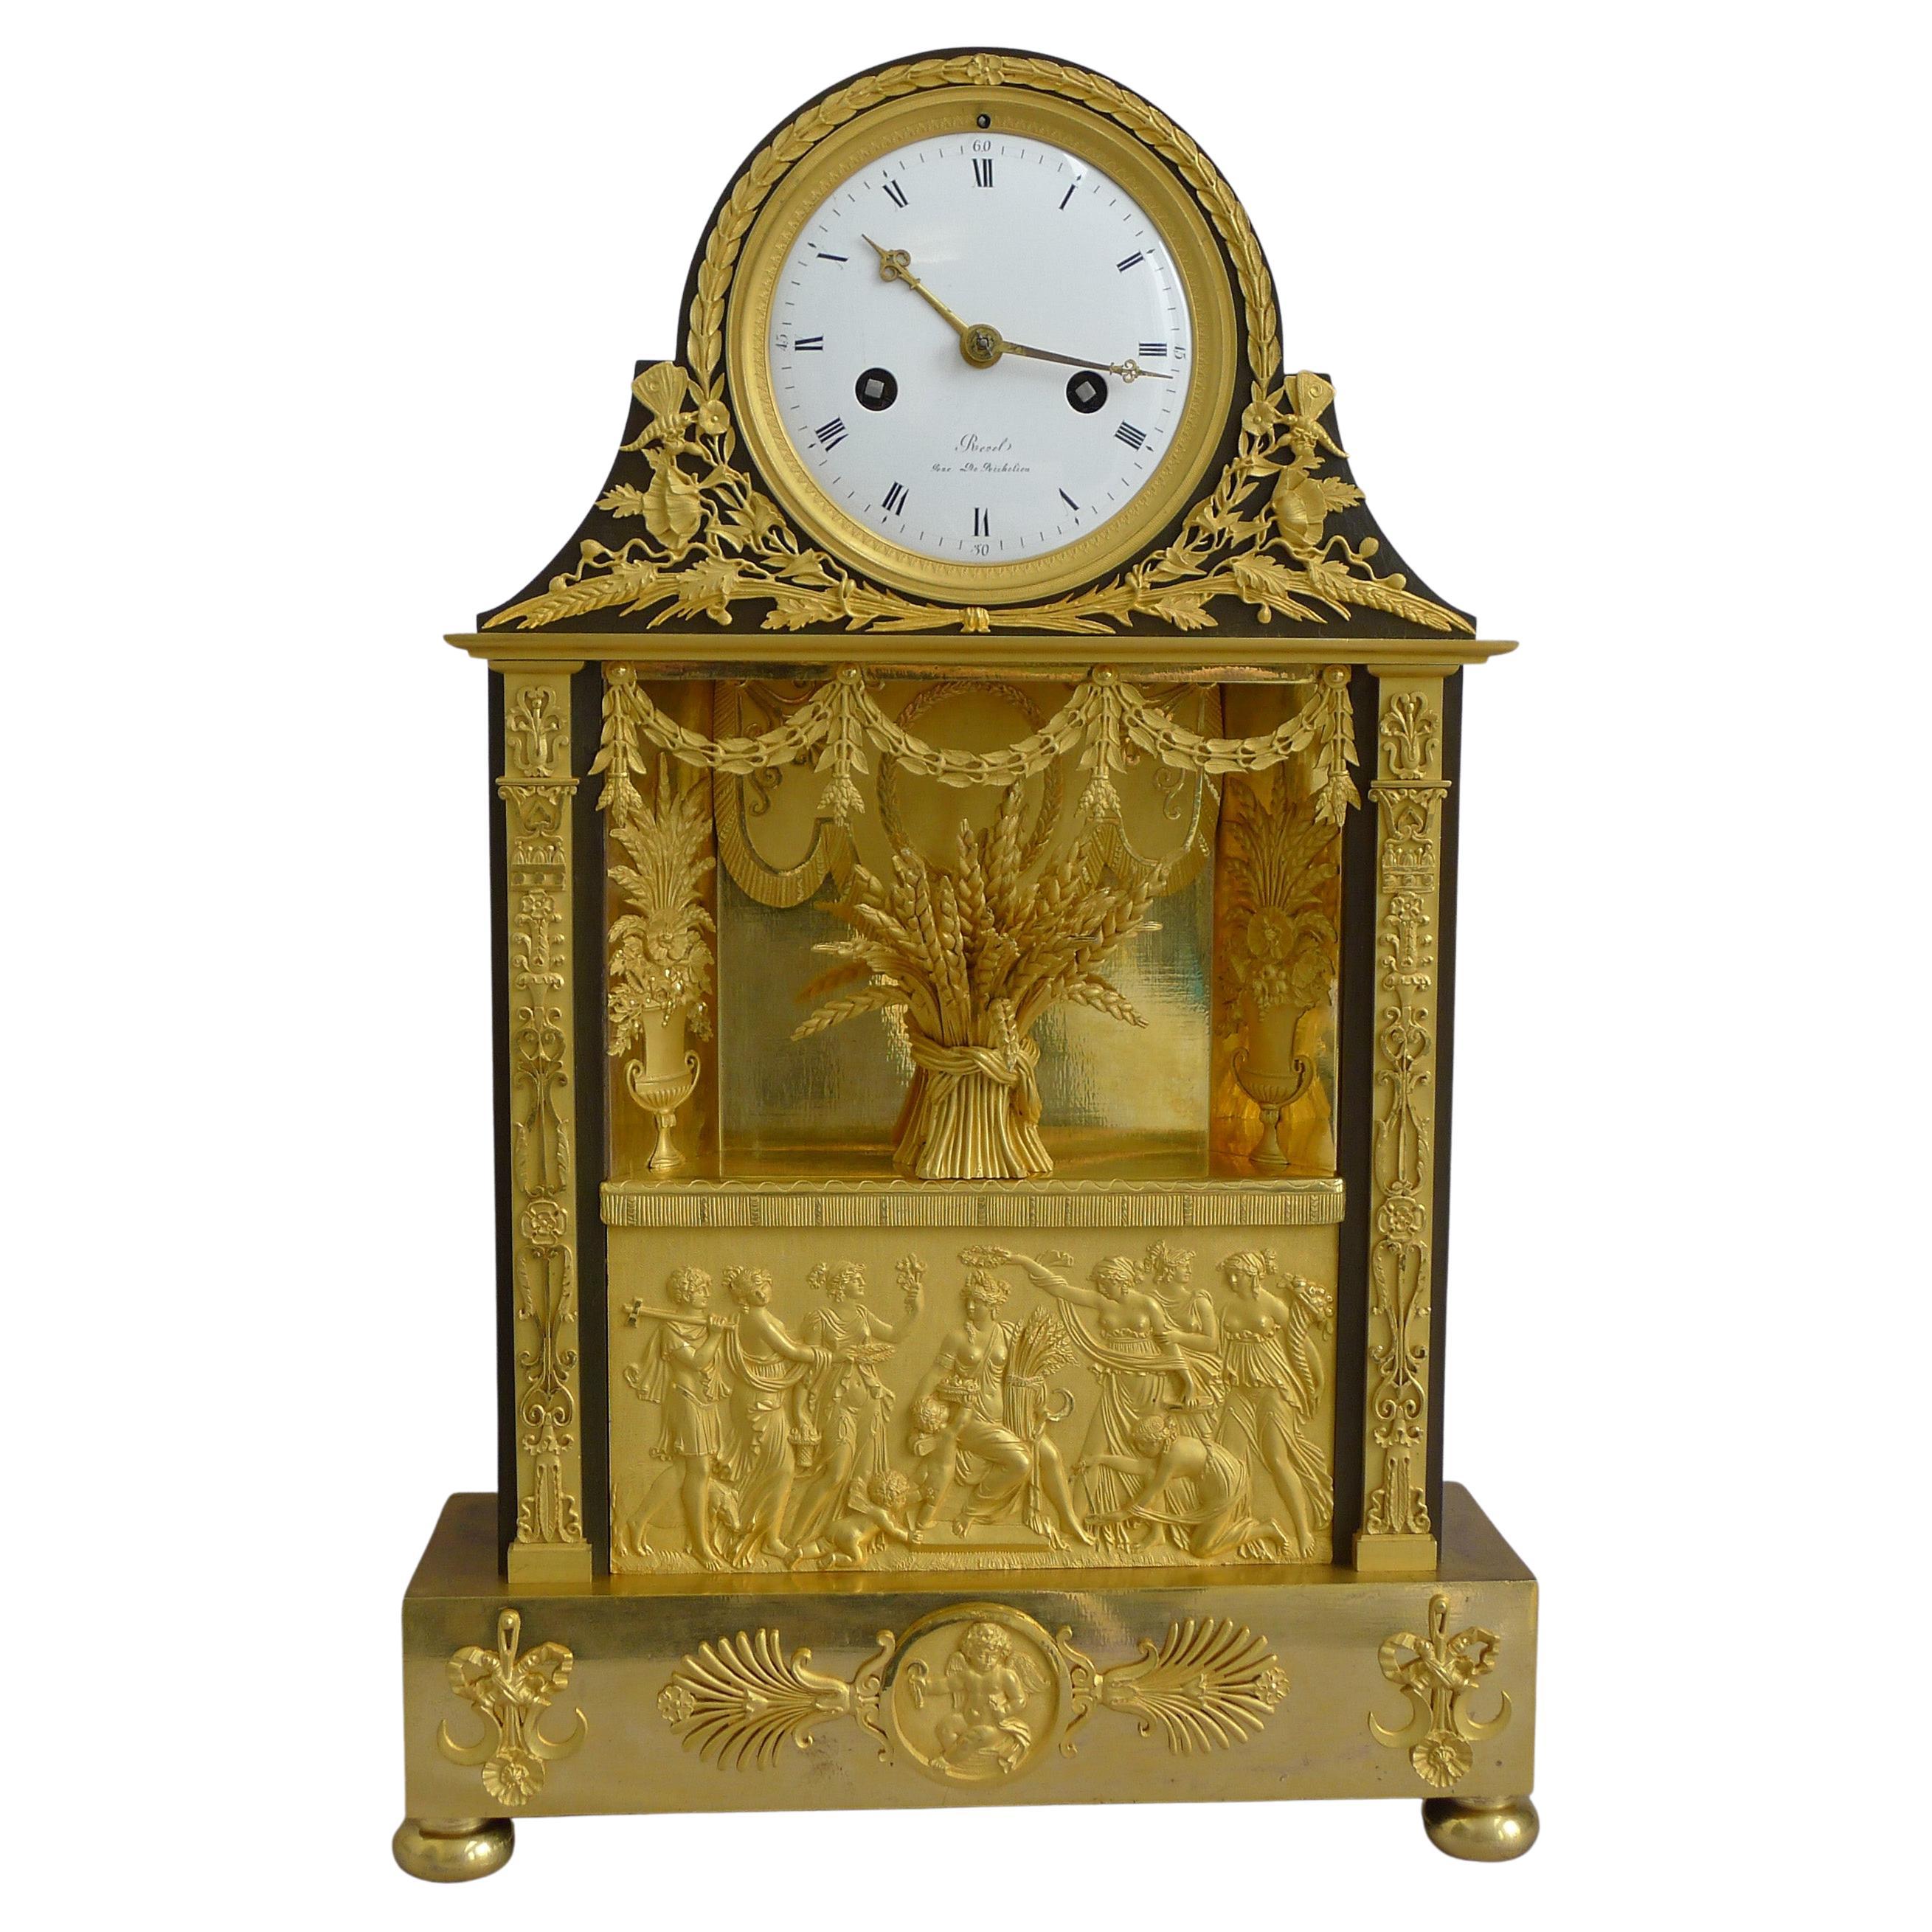 French Empire Clock in Ormolu and Patinated Bronze Signed Revel Rue De Richelieu